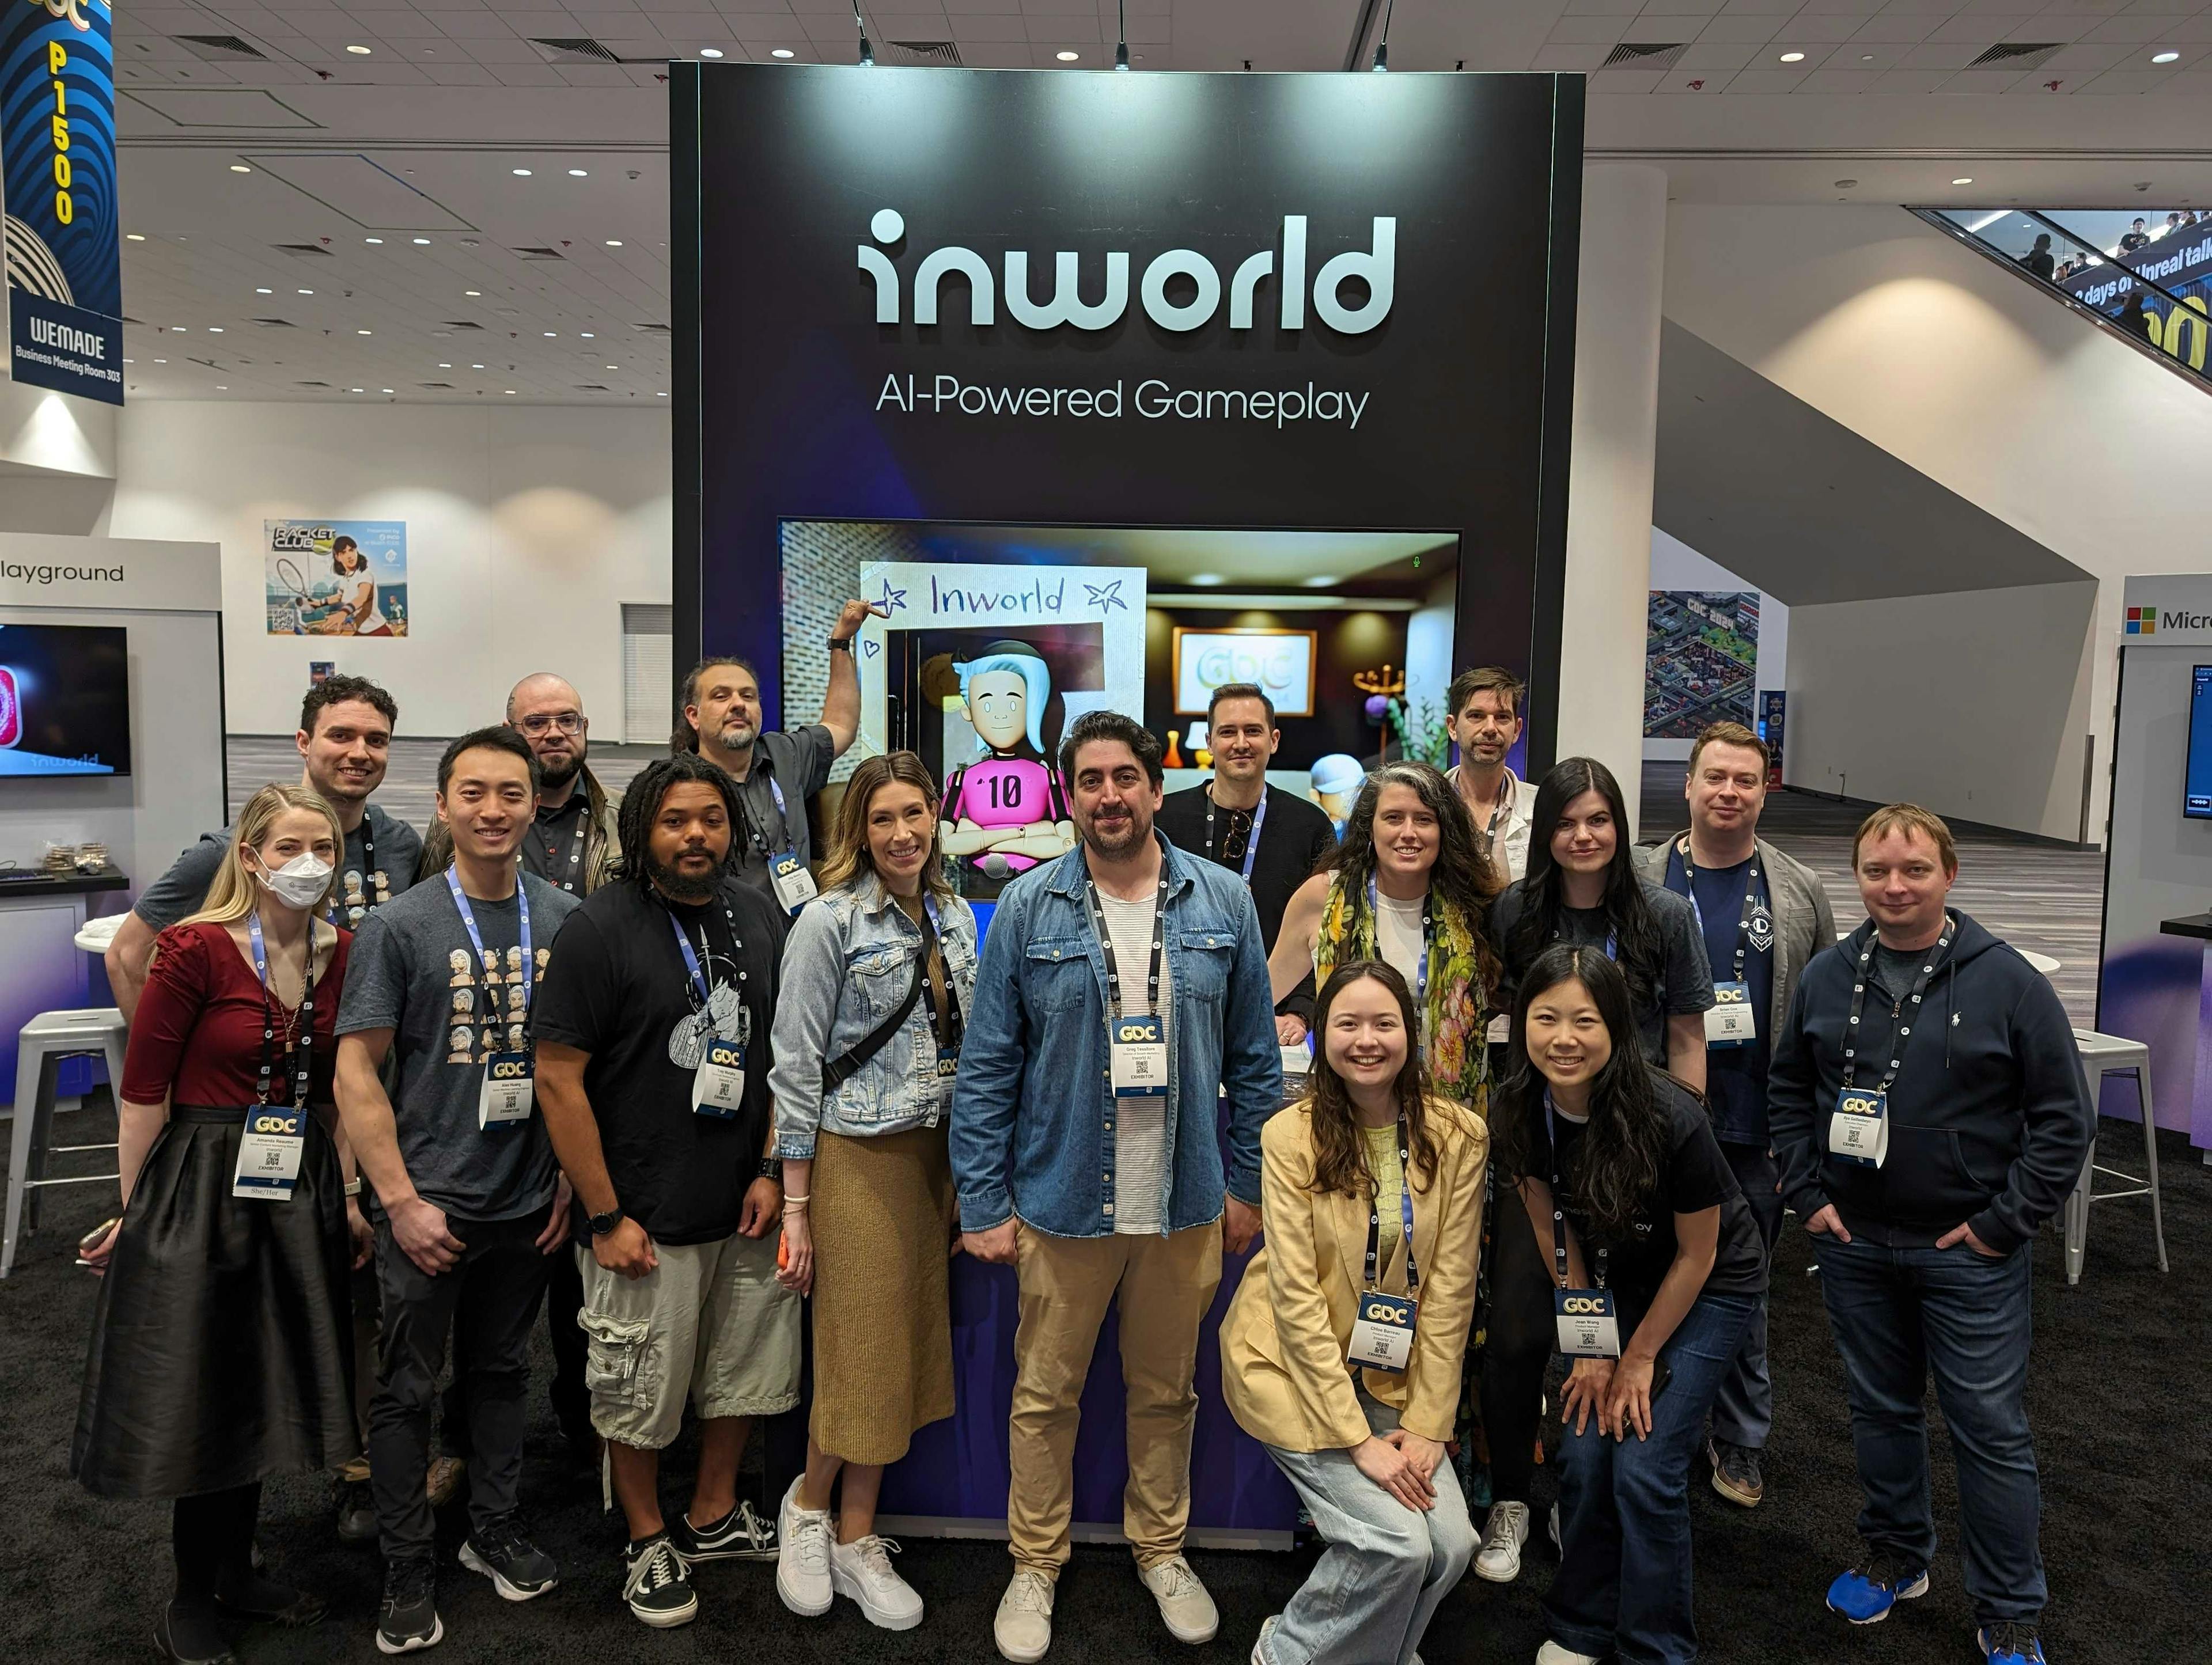 Say hello to the Inworld team at Booth P1615 at GDC